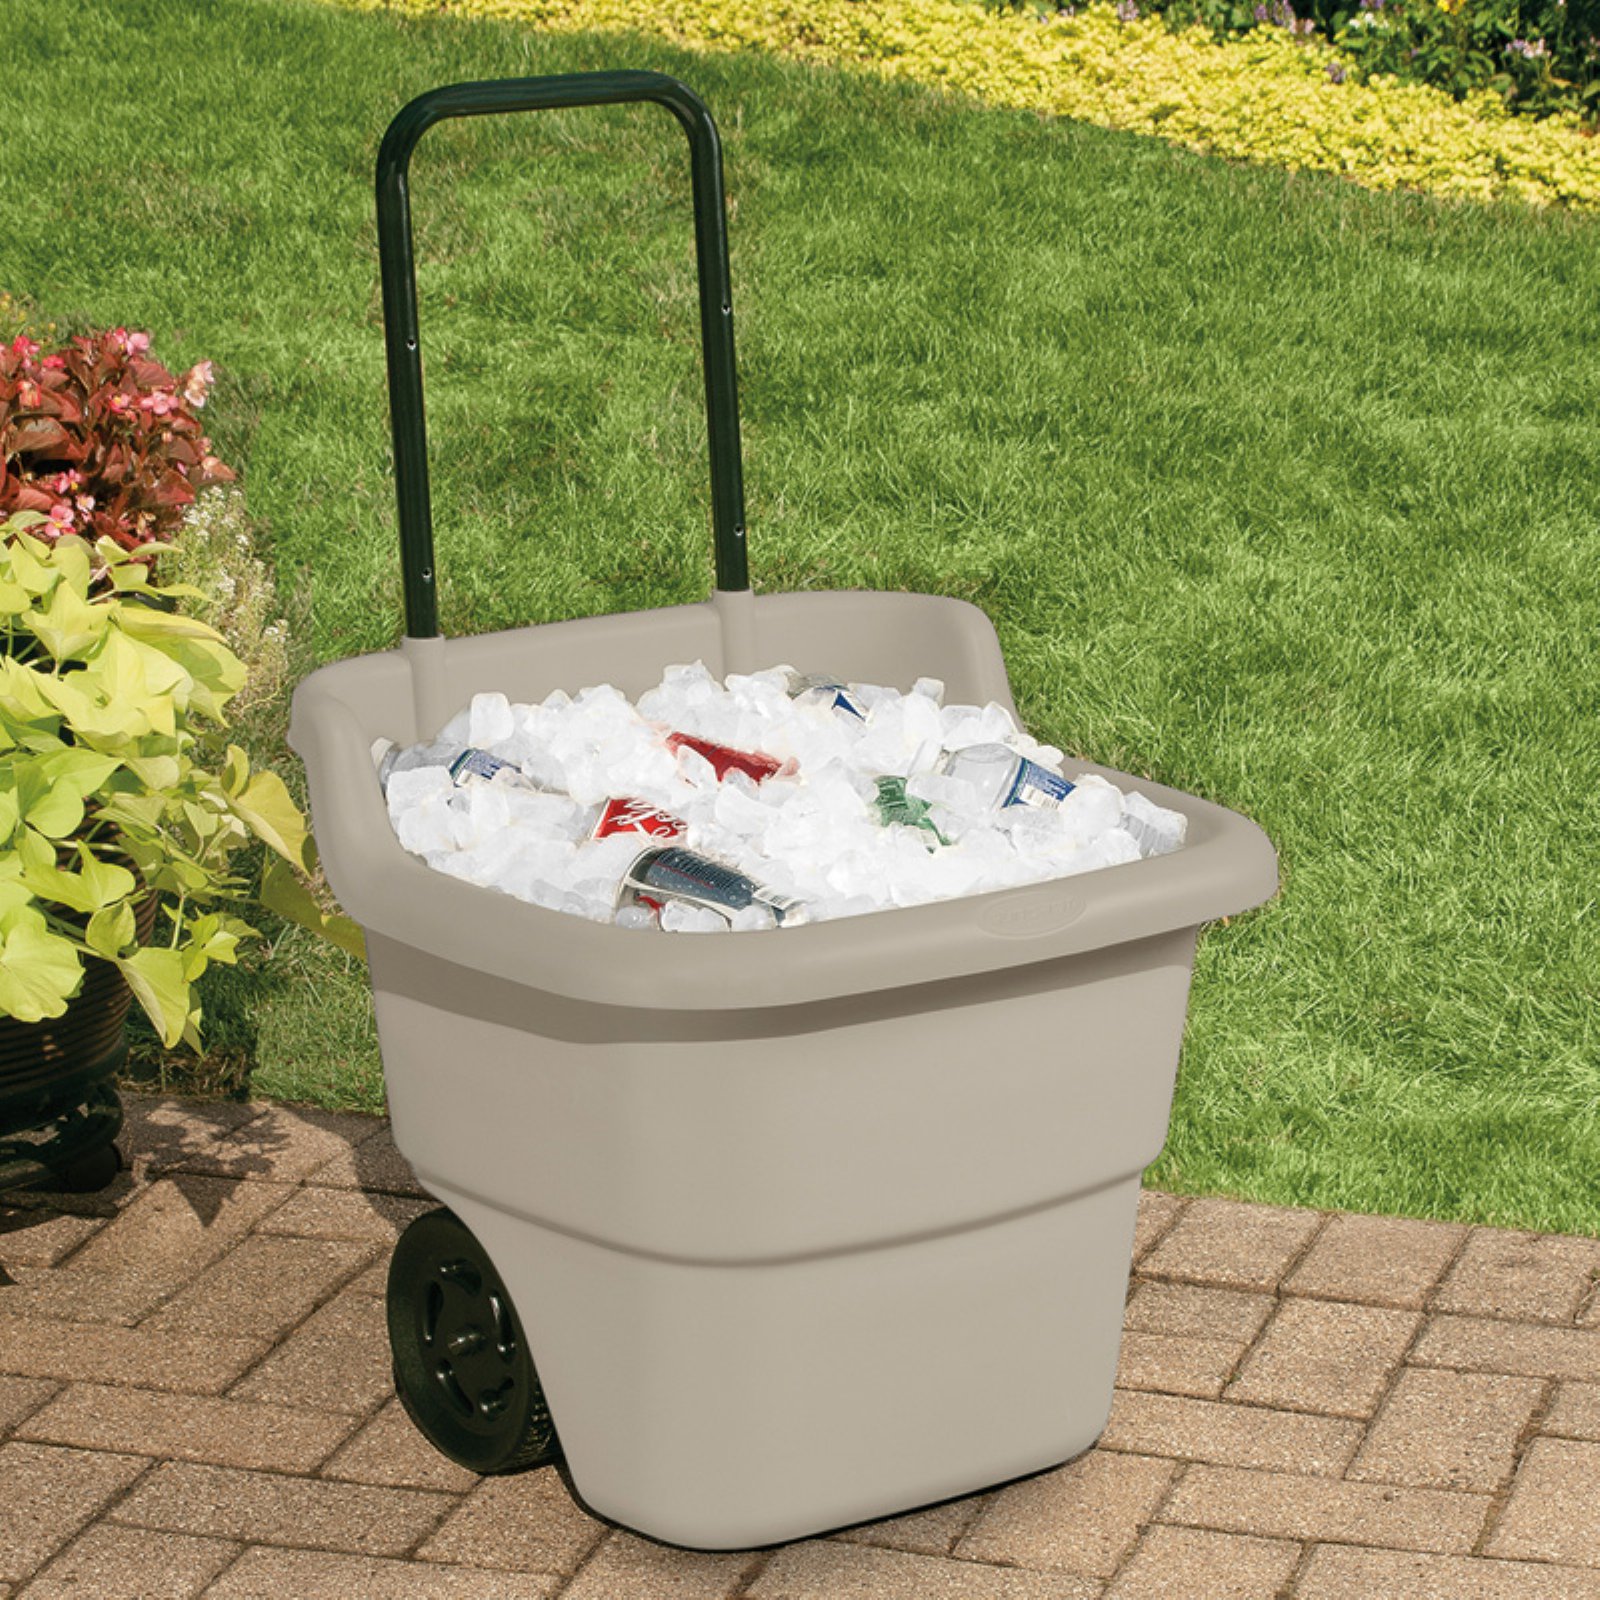 Suncast 15 Gallon Resin Rolling Lawn and Utility Cart, 20.75 in D x 35.75 in H x 22.5 in W - image 3 of 9